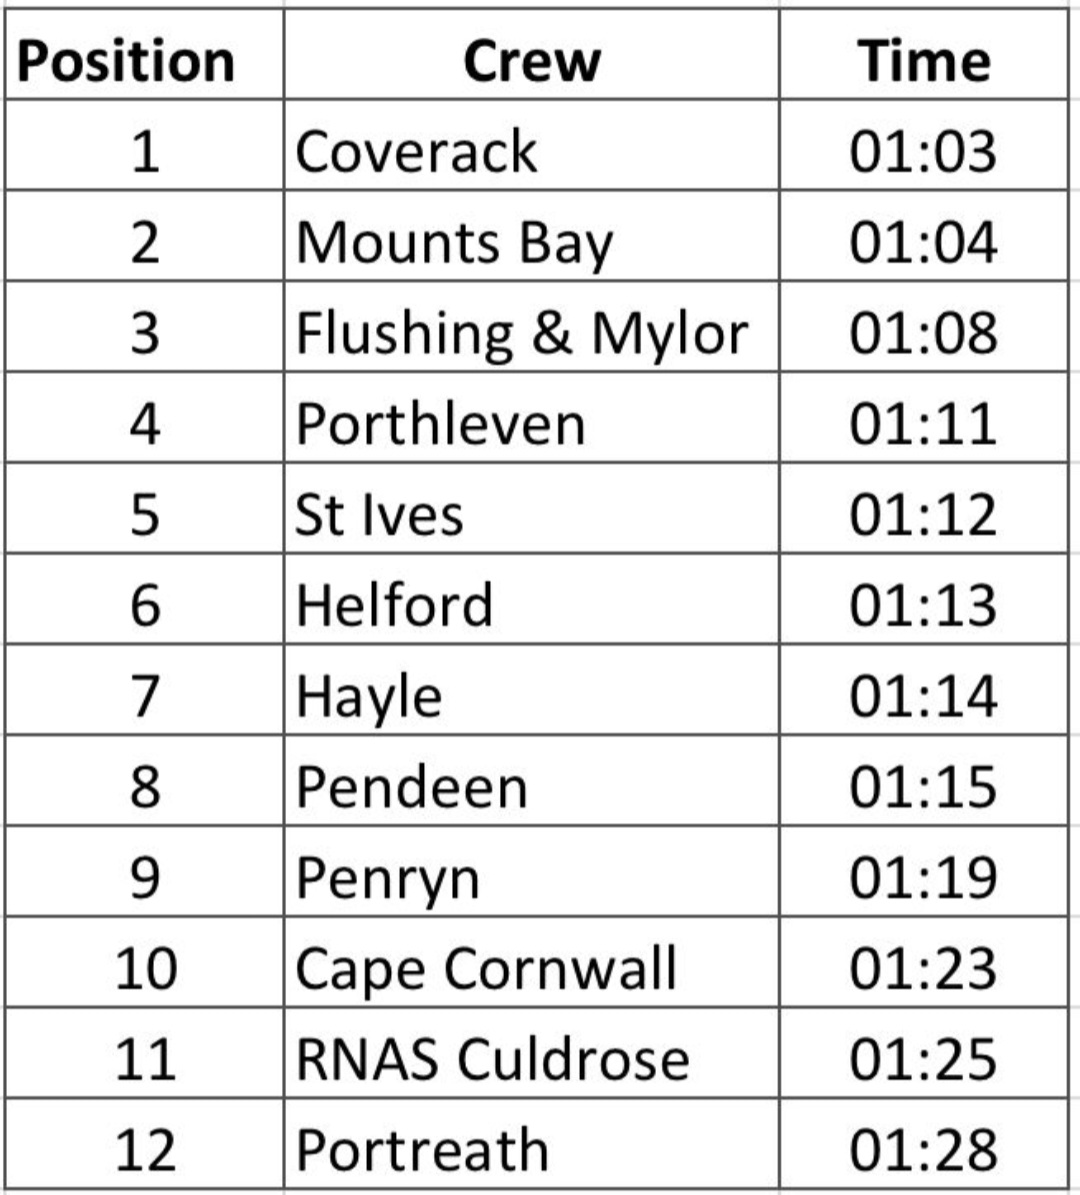 As promised, here are the results from the Across the Bay gig race from Marazion to Porthleven last night. Well done to Coverack for taking the victory and to all teams who took part.